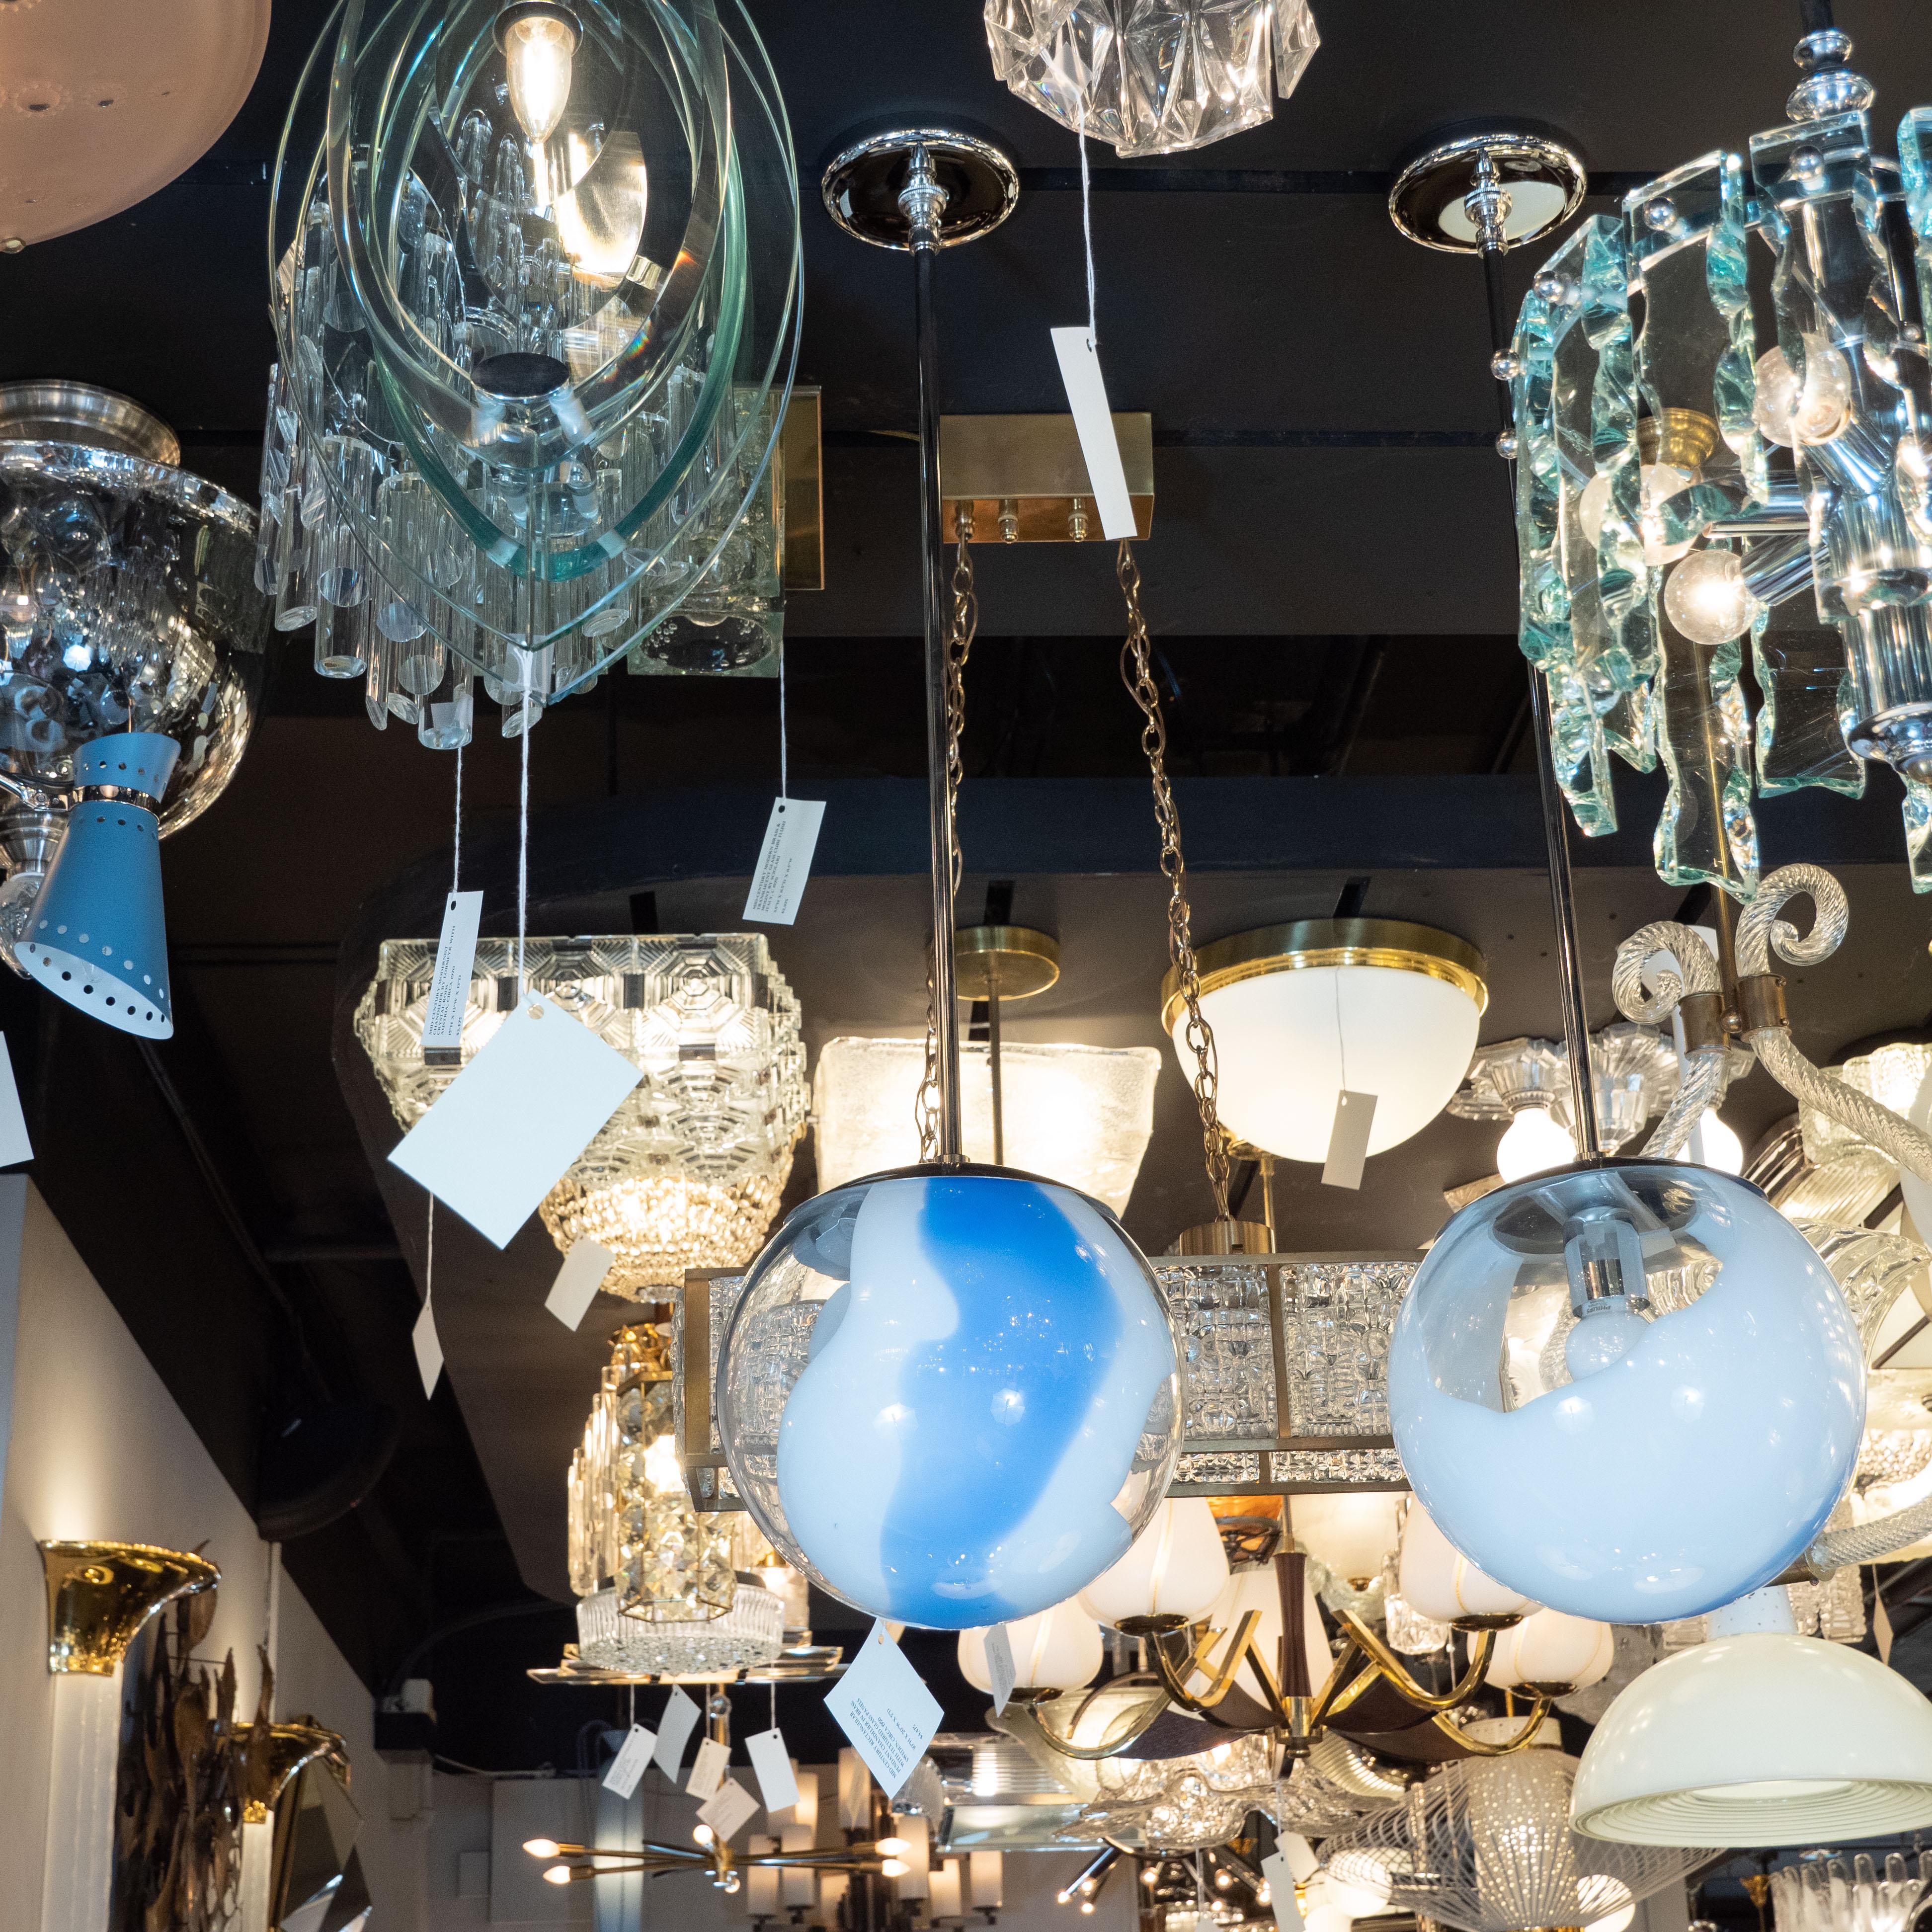 This stunning pair of modernist pendants were hand blown in Murano, Italy- the island off the coast of Venice renowned for centuries for its superlative glass production. They feature spherical forms realized in translucent glass with opaque white